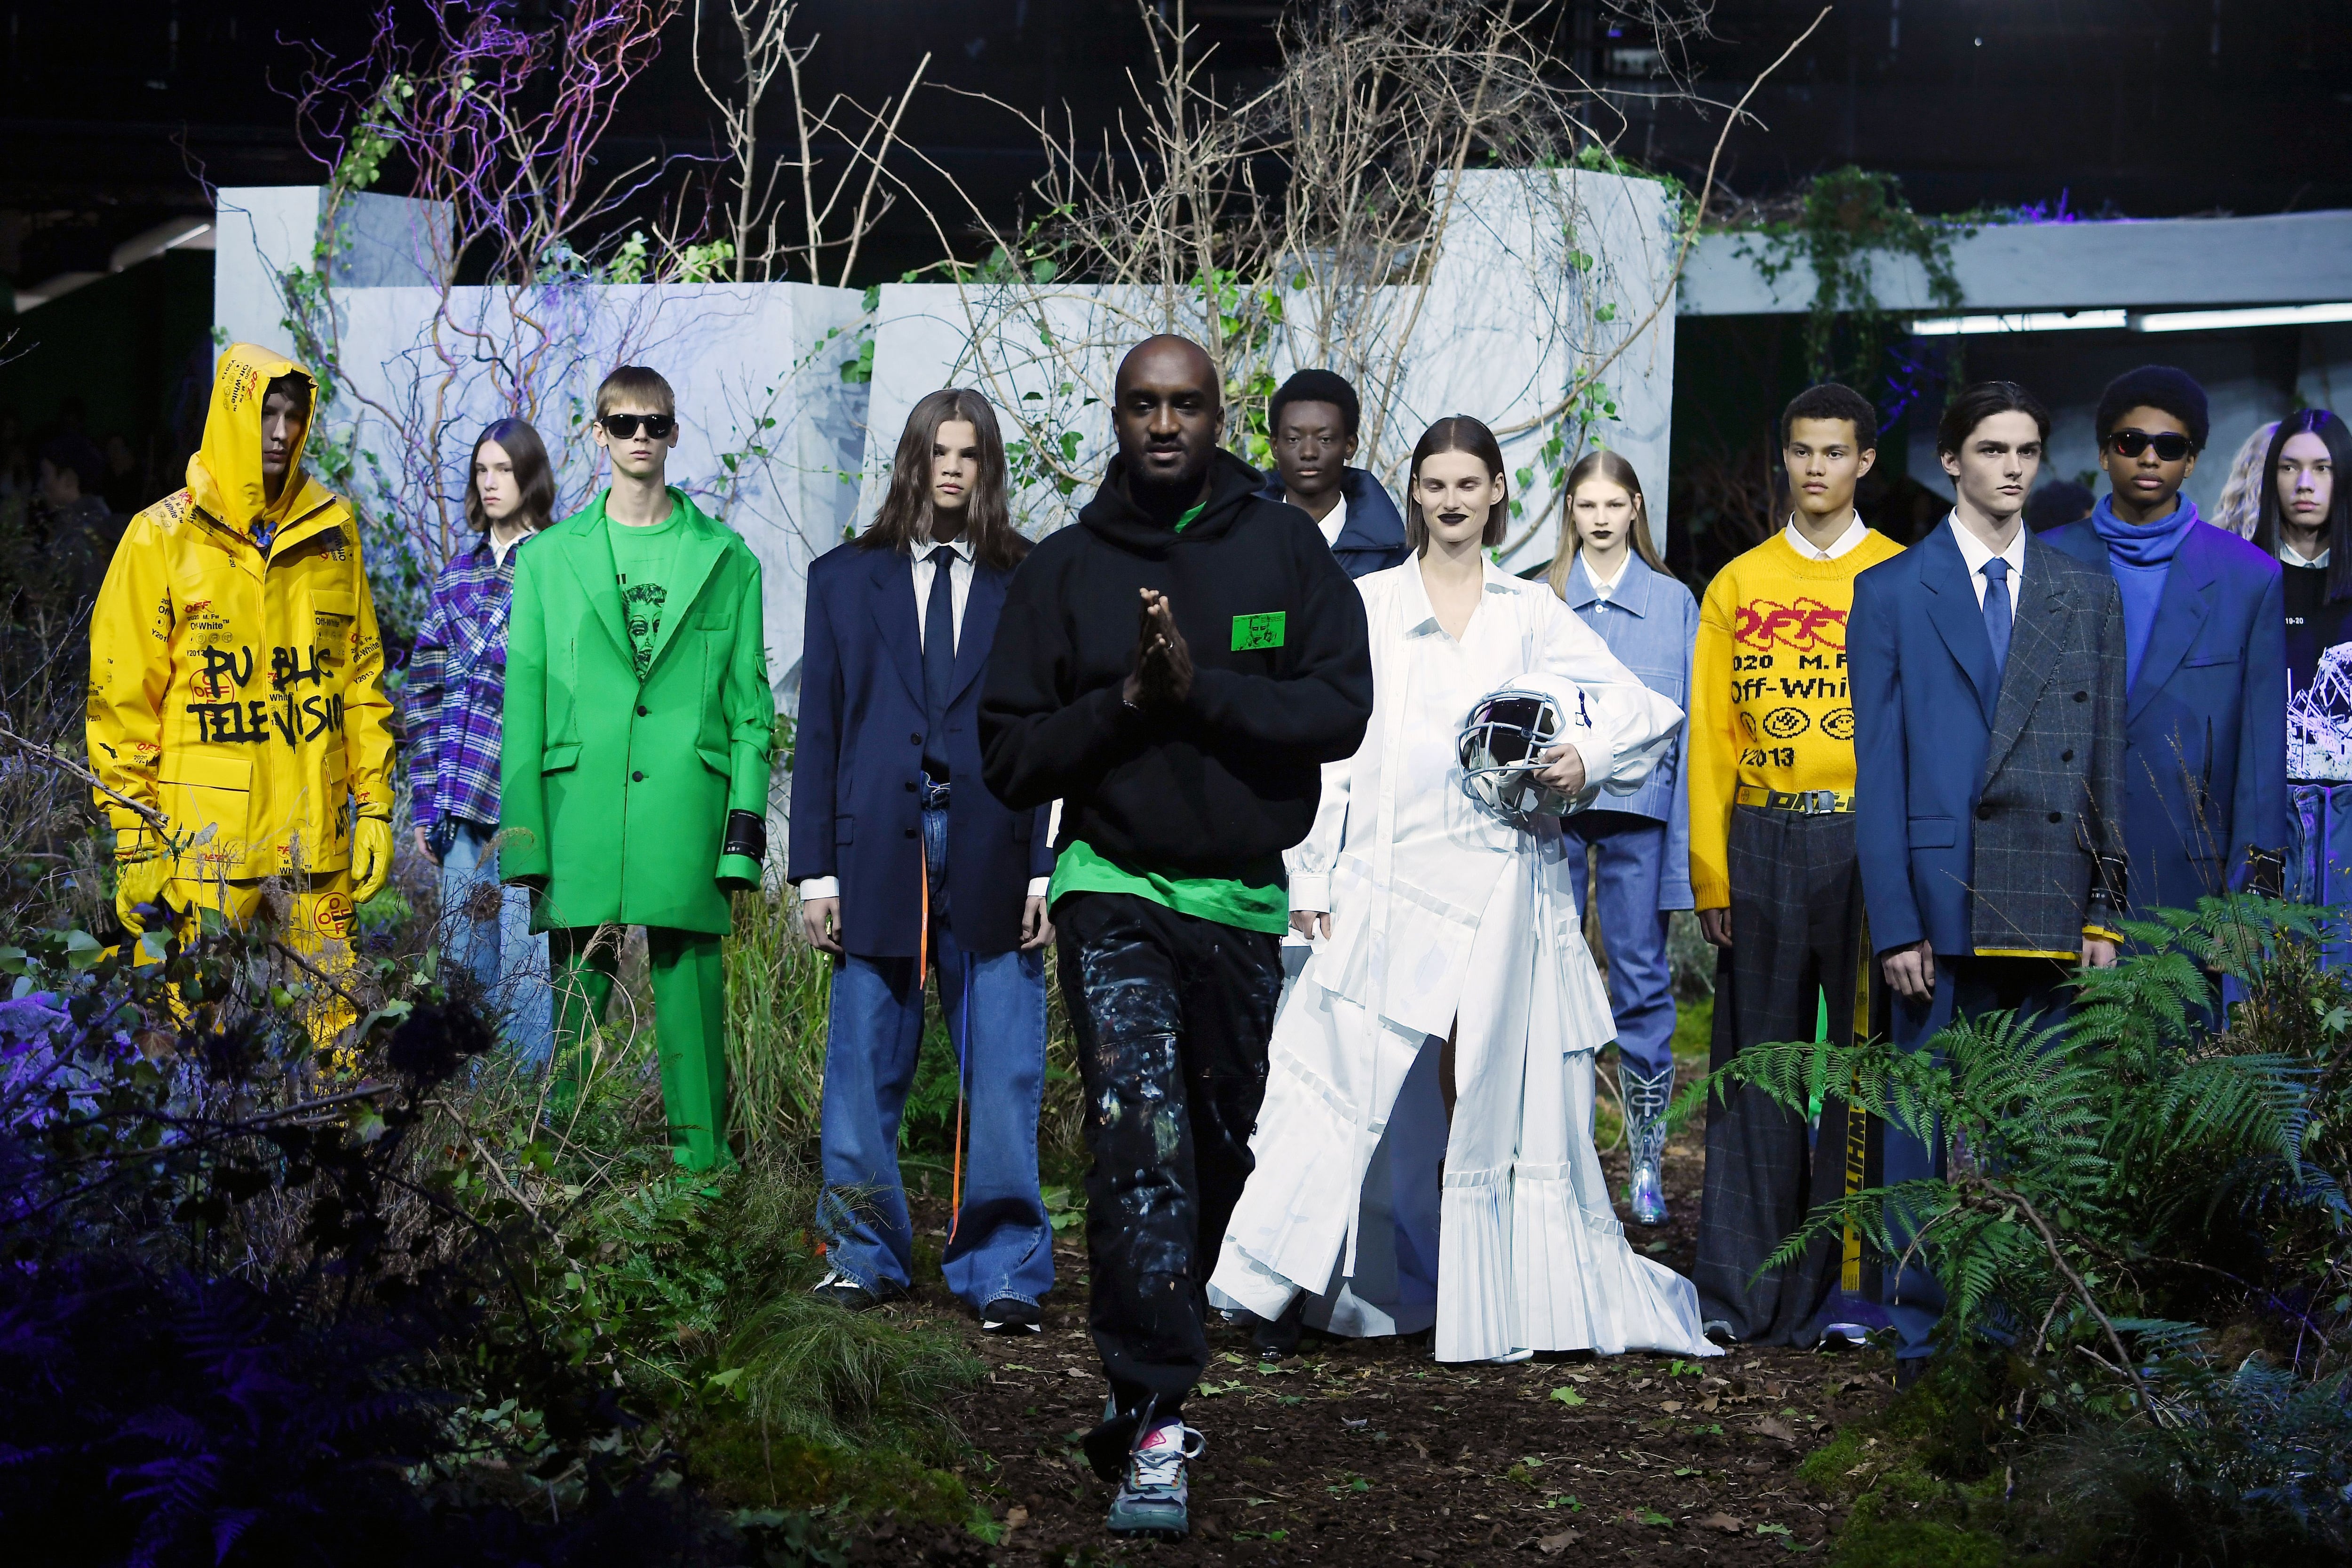 Virgil Abloh's final fashion collection shown in Miami